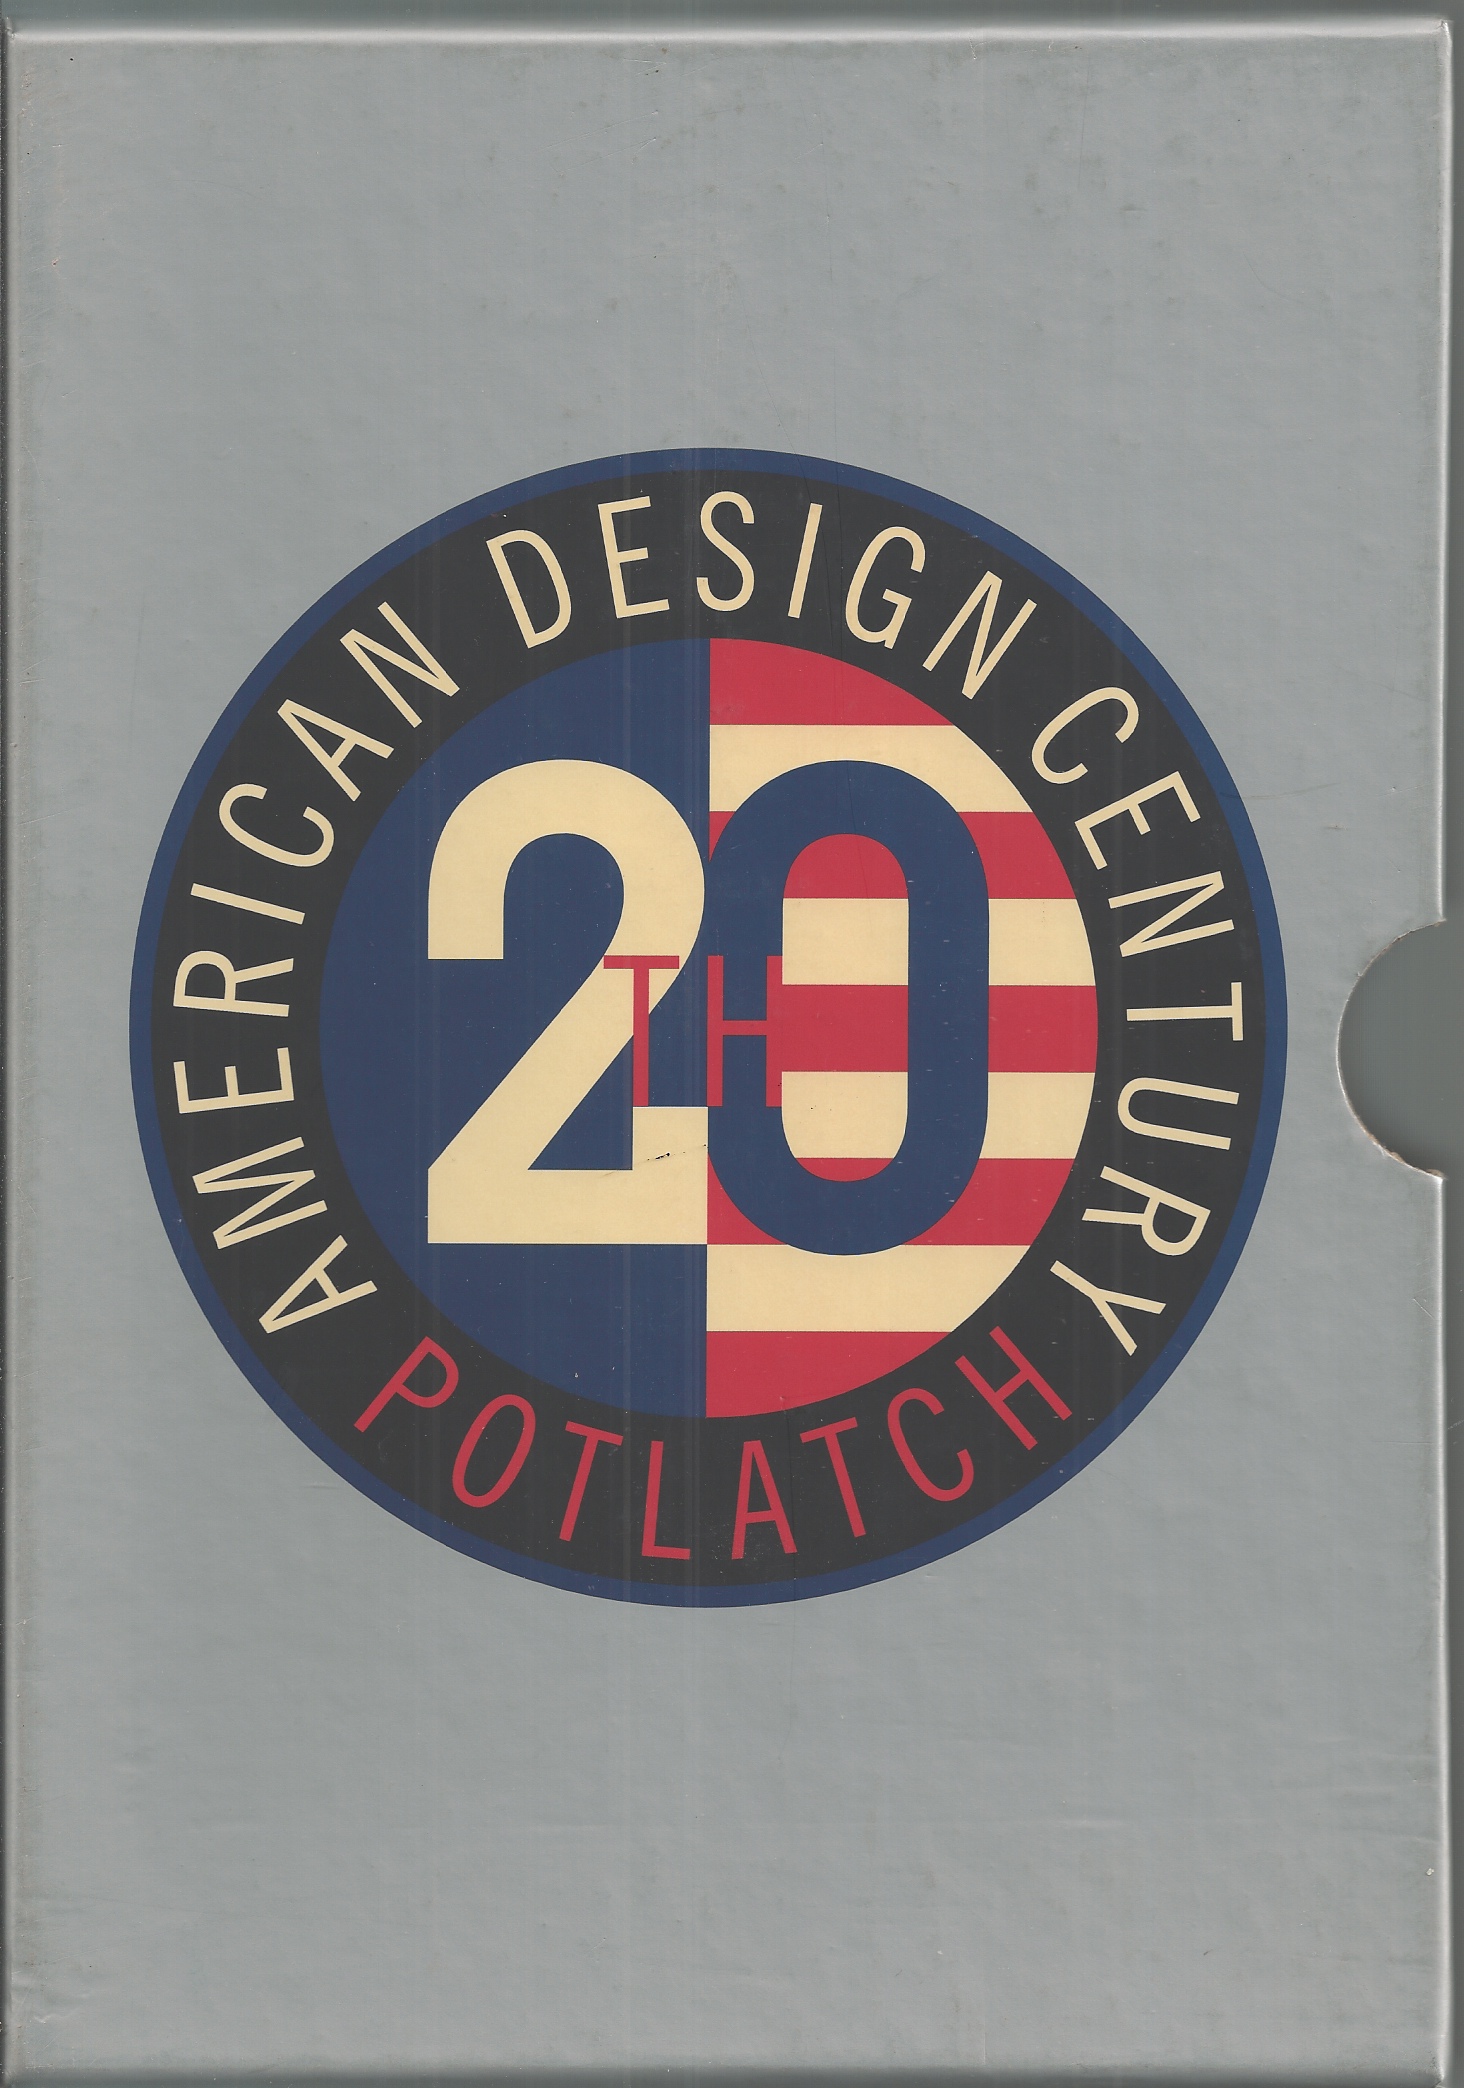 POTLATCH - American Design 20th Century, 4 Volumes Typography, Posters, Annual Reports, Icons, in Original Slipcase